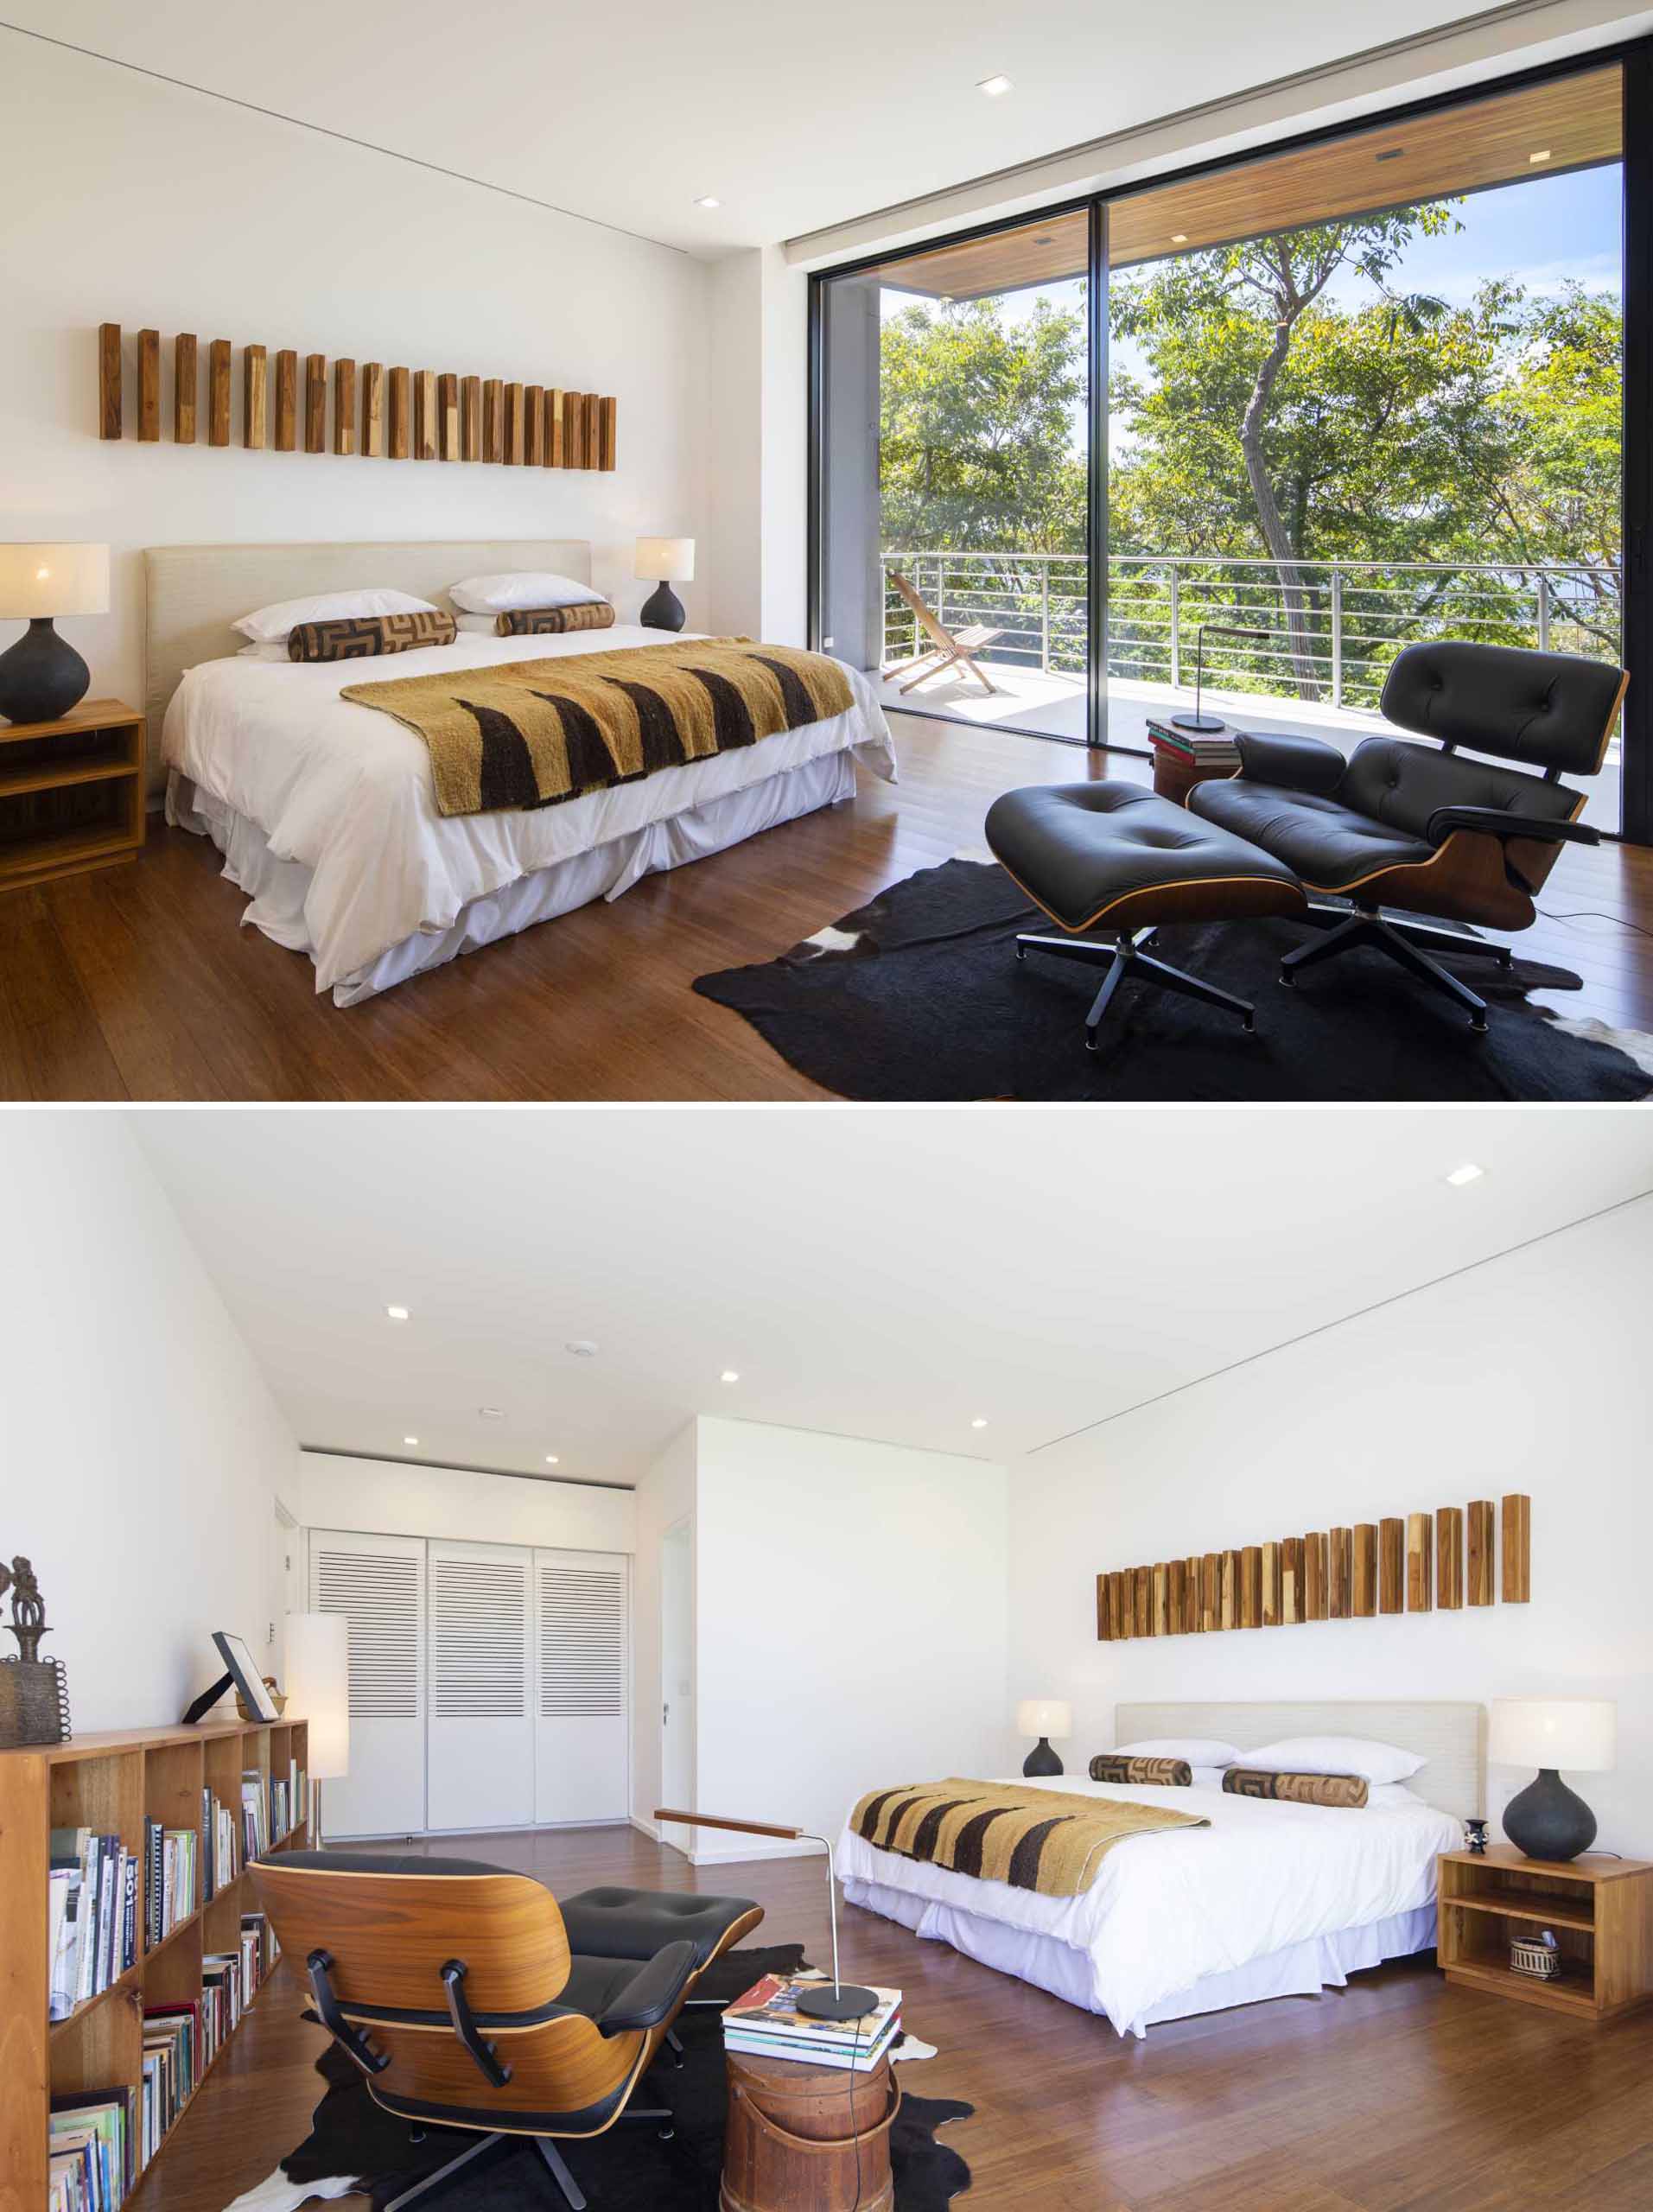 A contemporary bedroom with wood floors and access to a balcony.